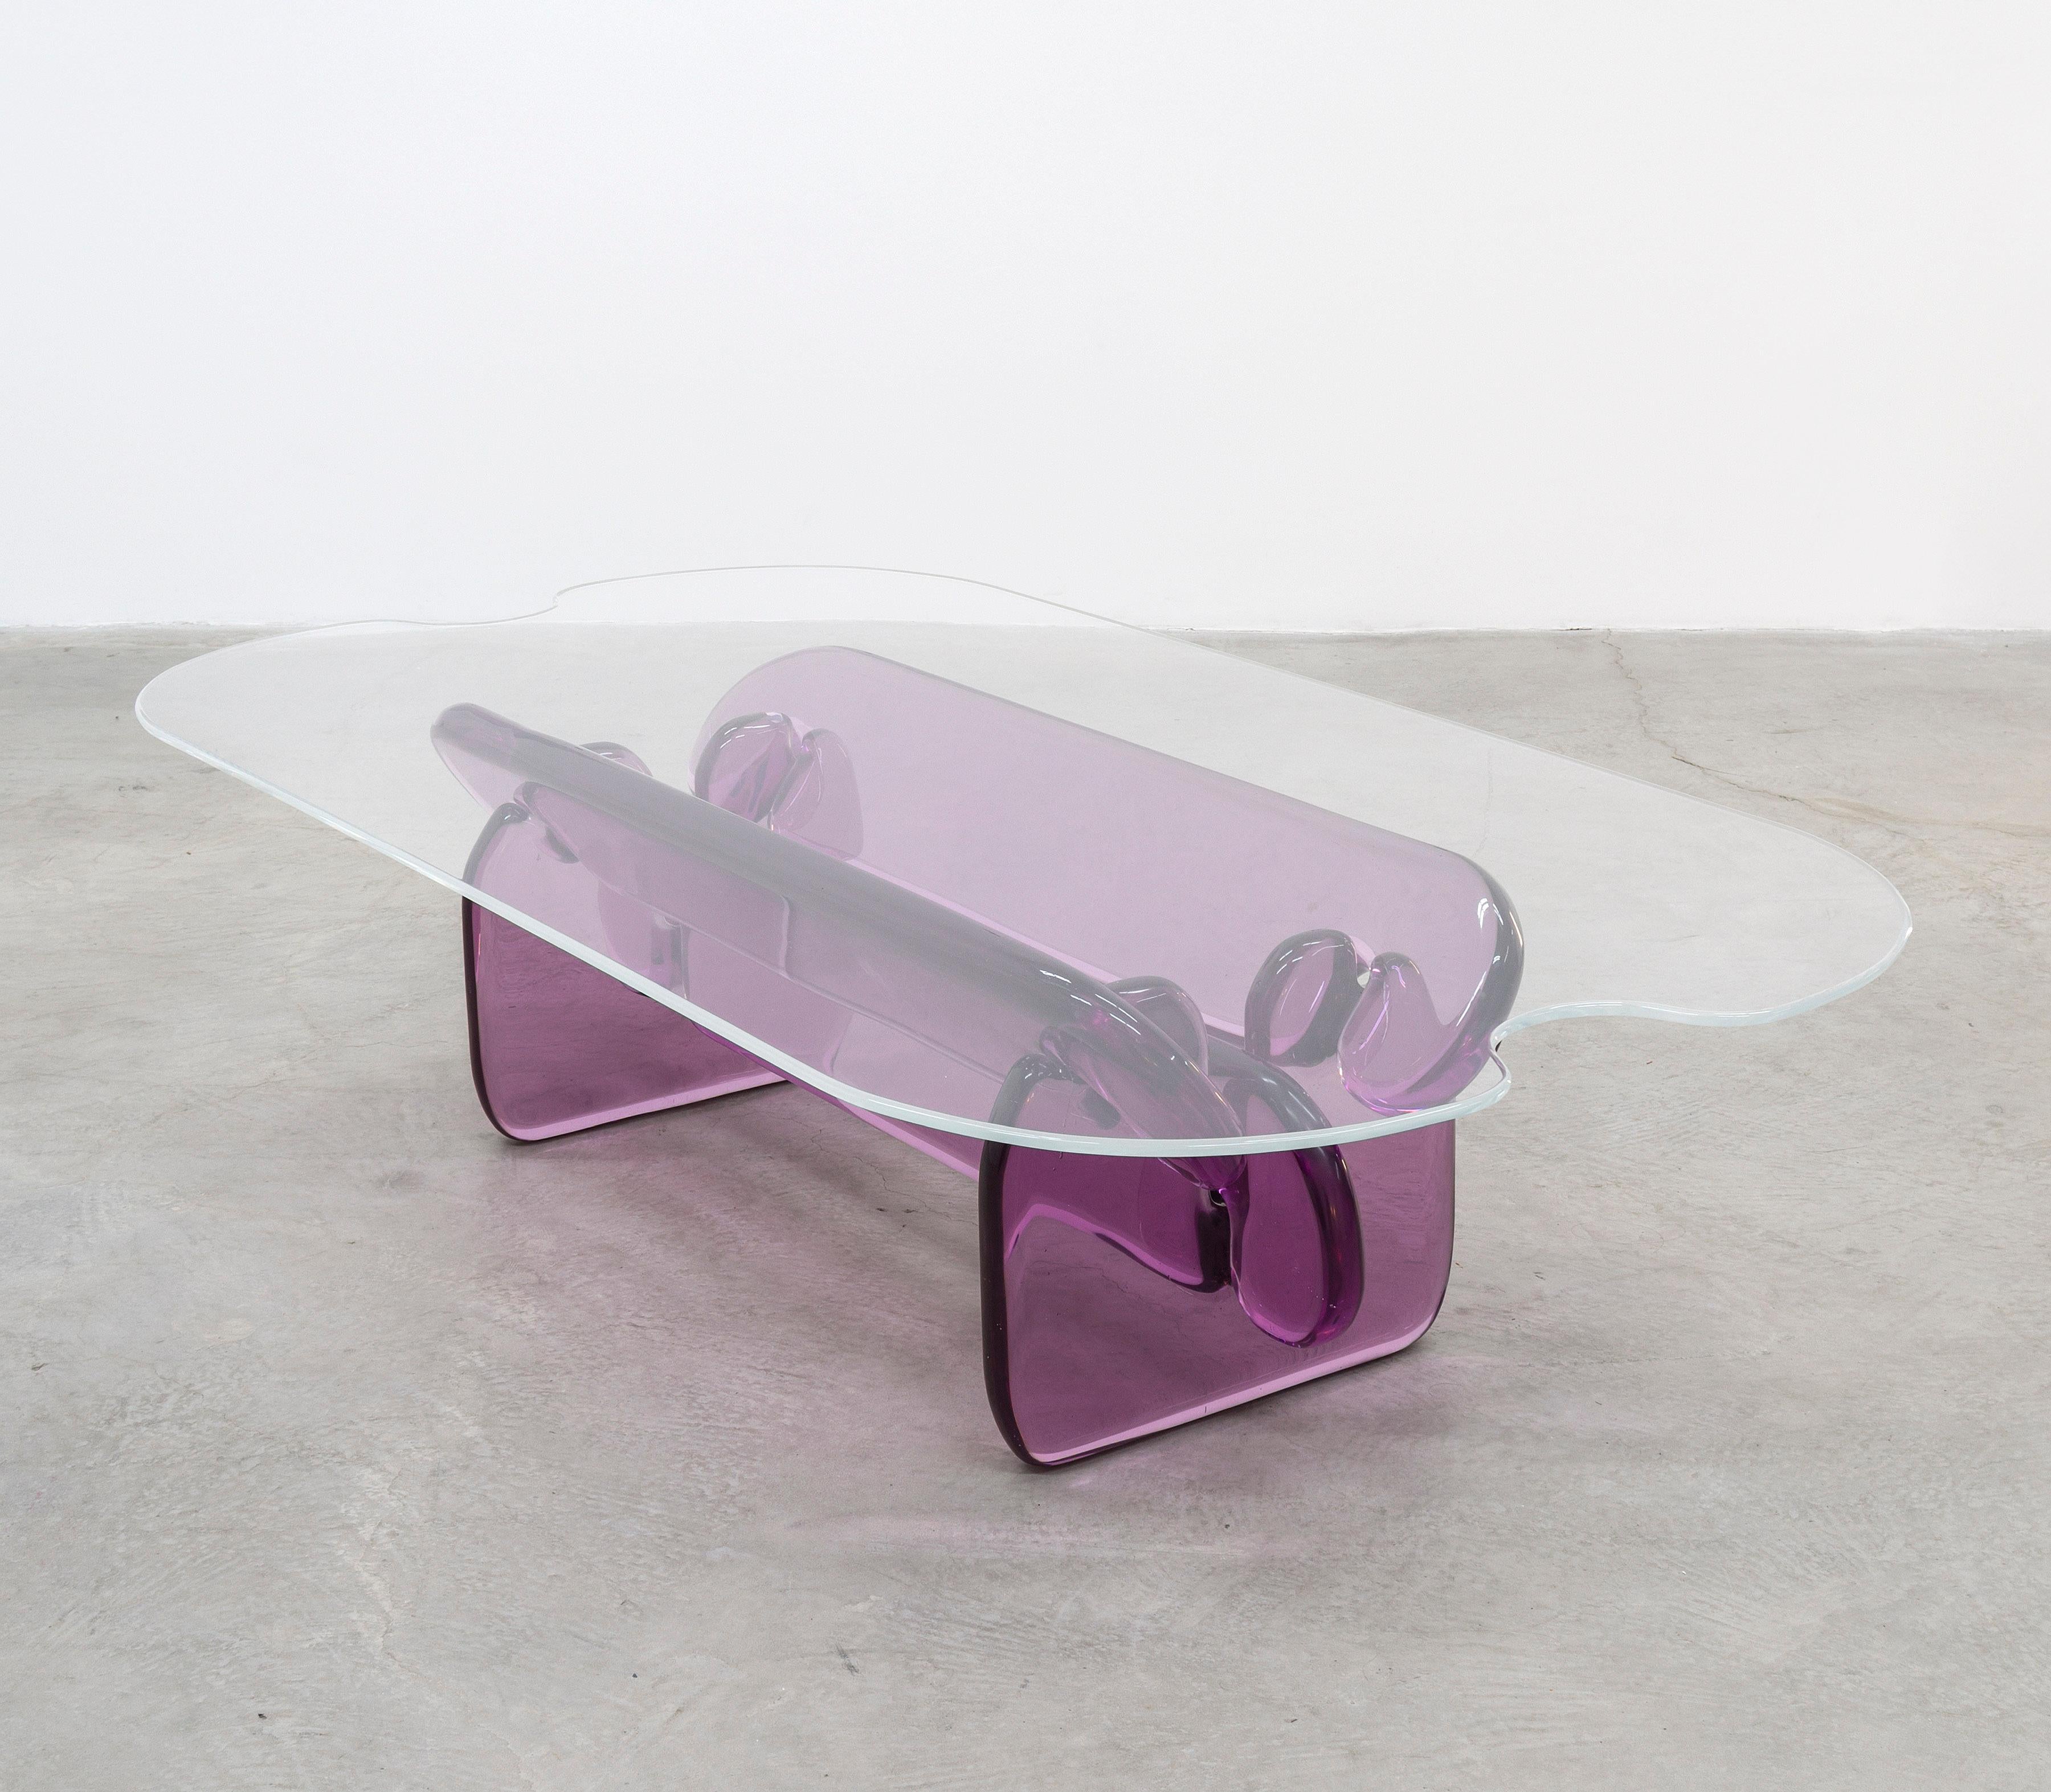 The Plump table is constructed of five, solid cast, resin parts that interlock to create the base for a clear acrylic top. The parts are rounded over and pillow-like to compliment its simple nature and childlike assembly. Resin was employed because